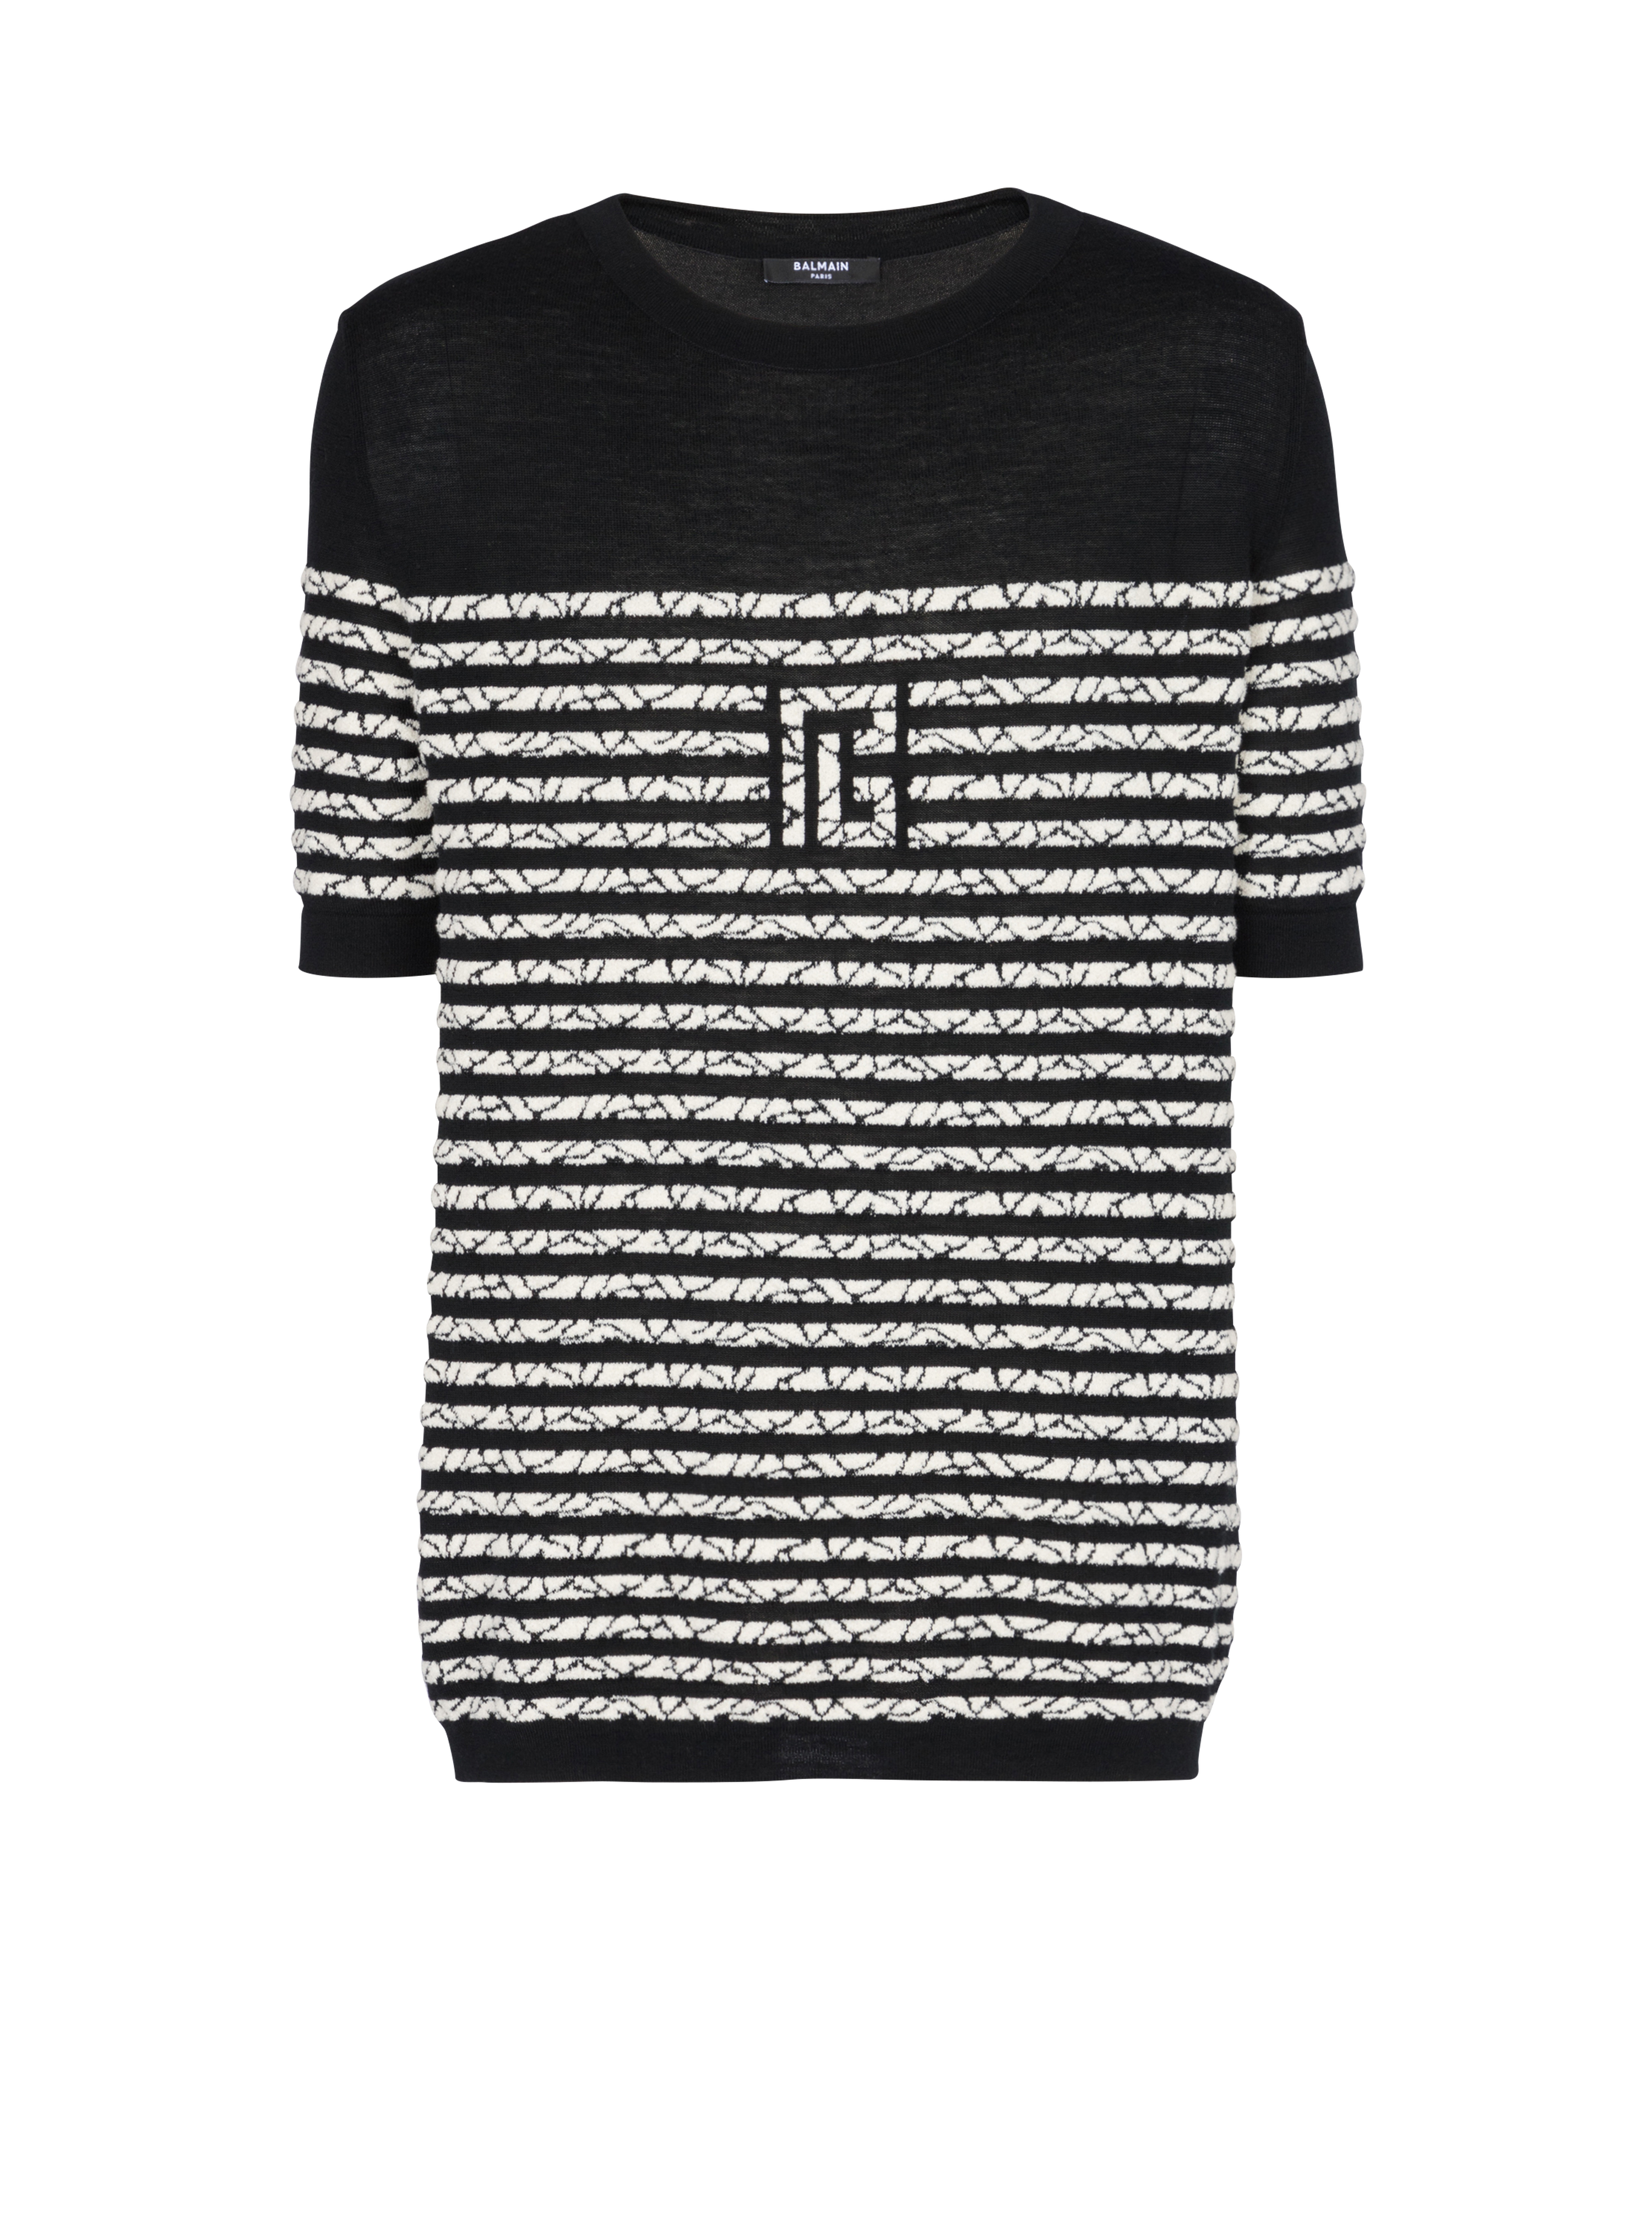 Wool T-shirt with marbled stripes, black